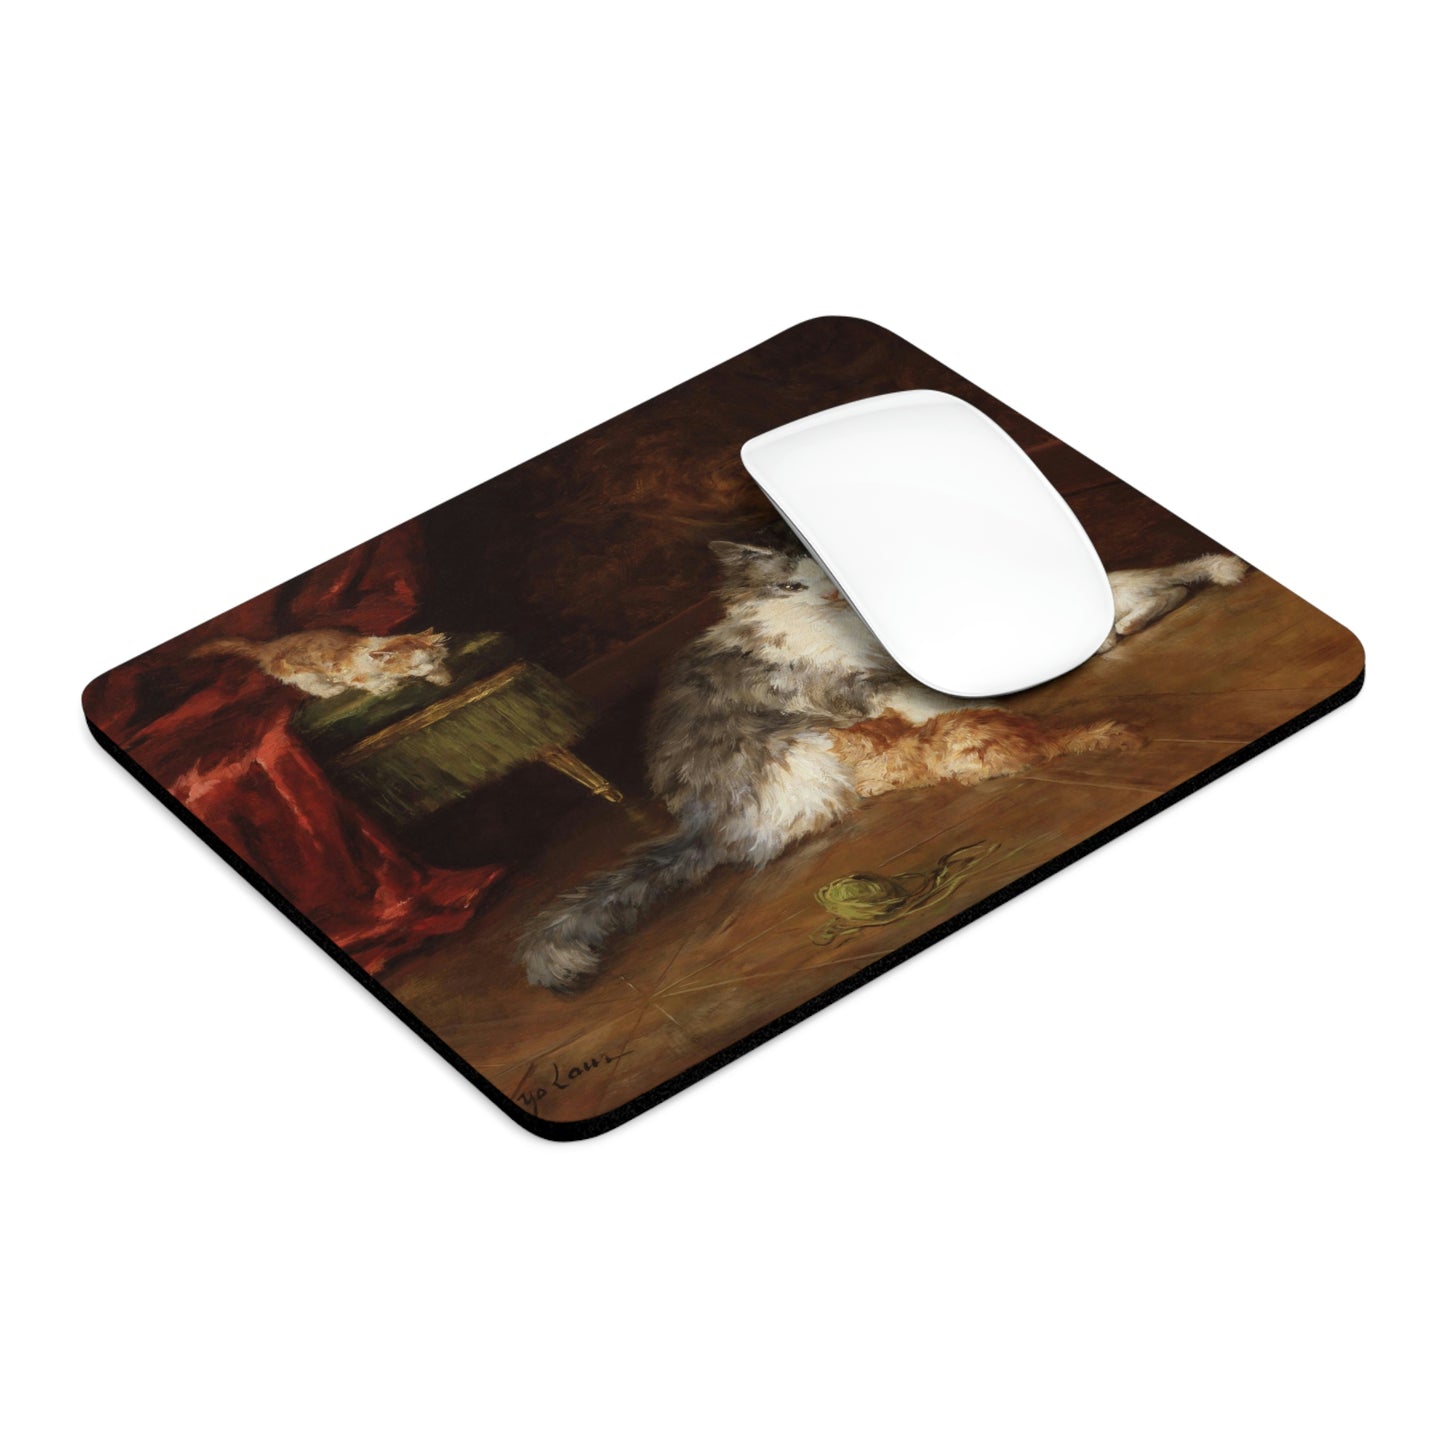 Marie Yvonne Laur: "Motherly Love" – Mouse Pad